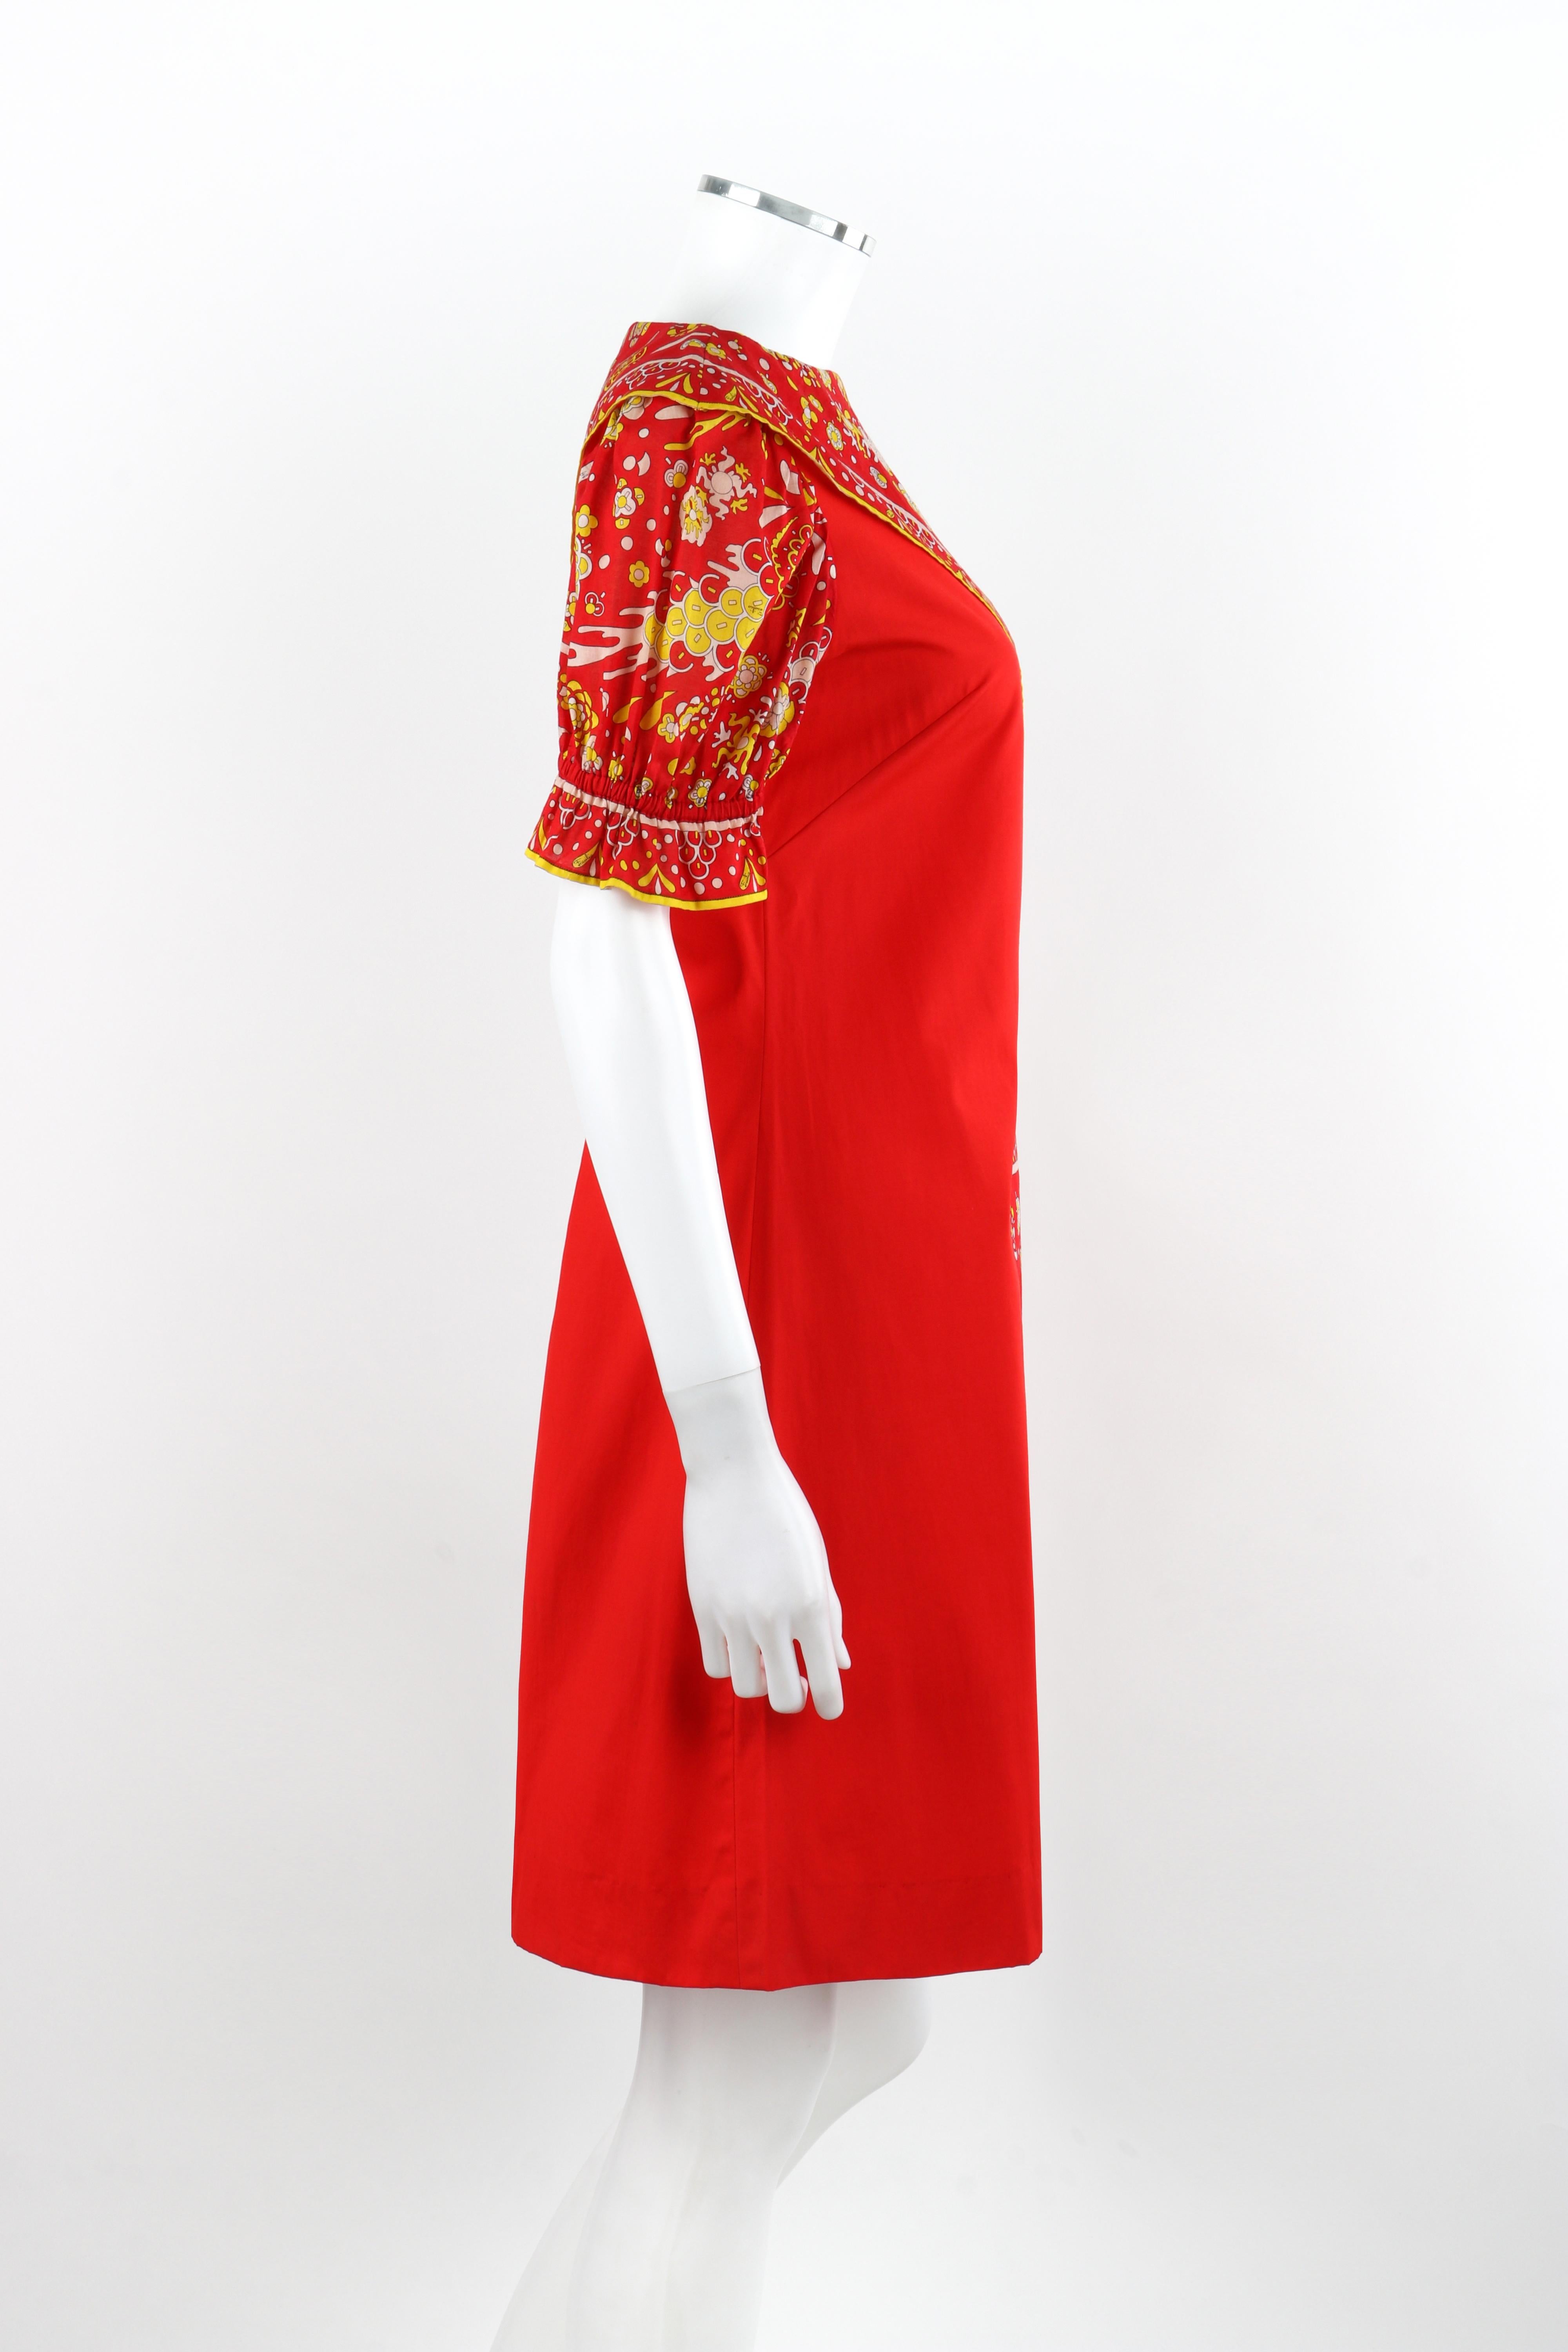 Women's EMILIO PUCCI c.1970s Red Cotton Scarf & Pocket Accents A Line Knee Length Dress For Sale